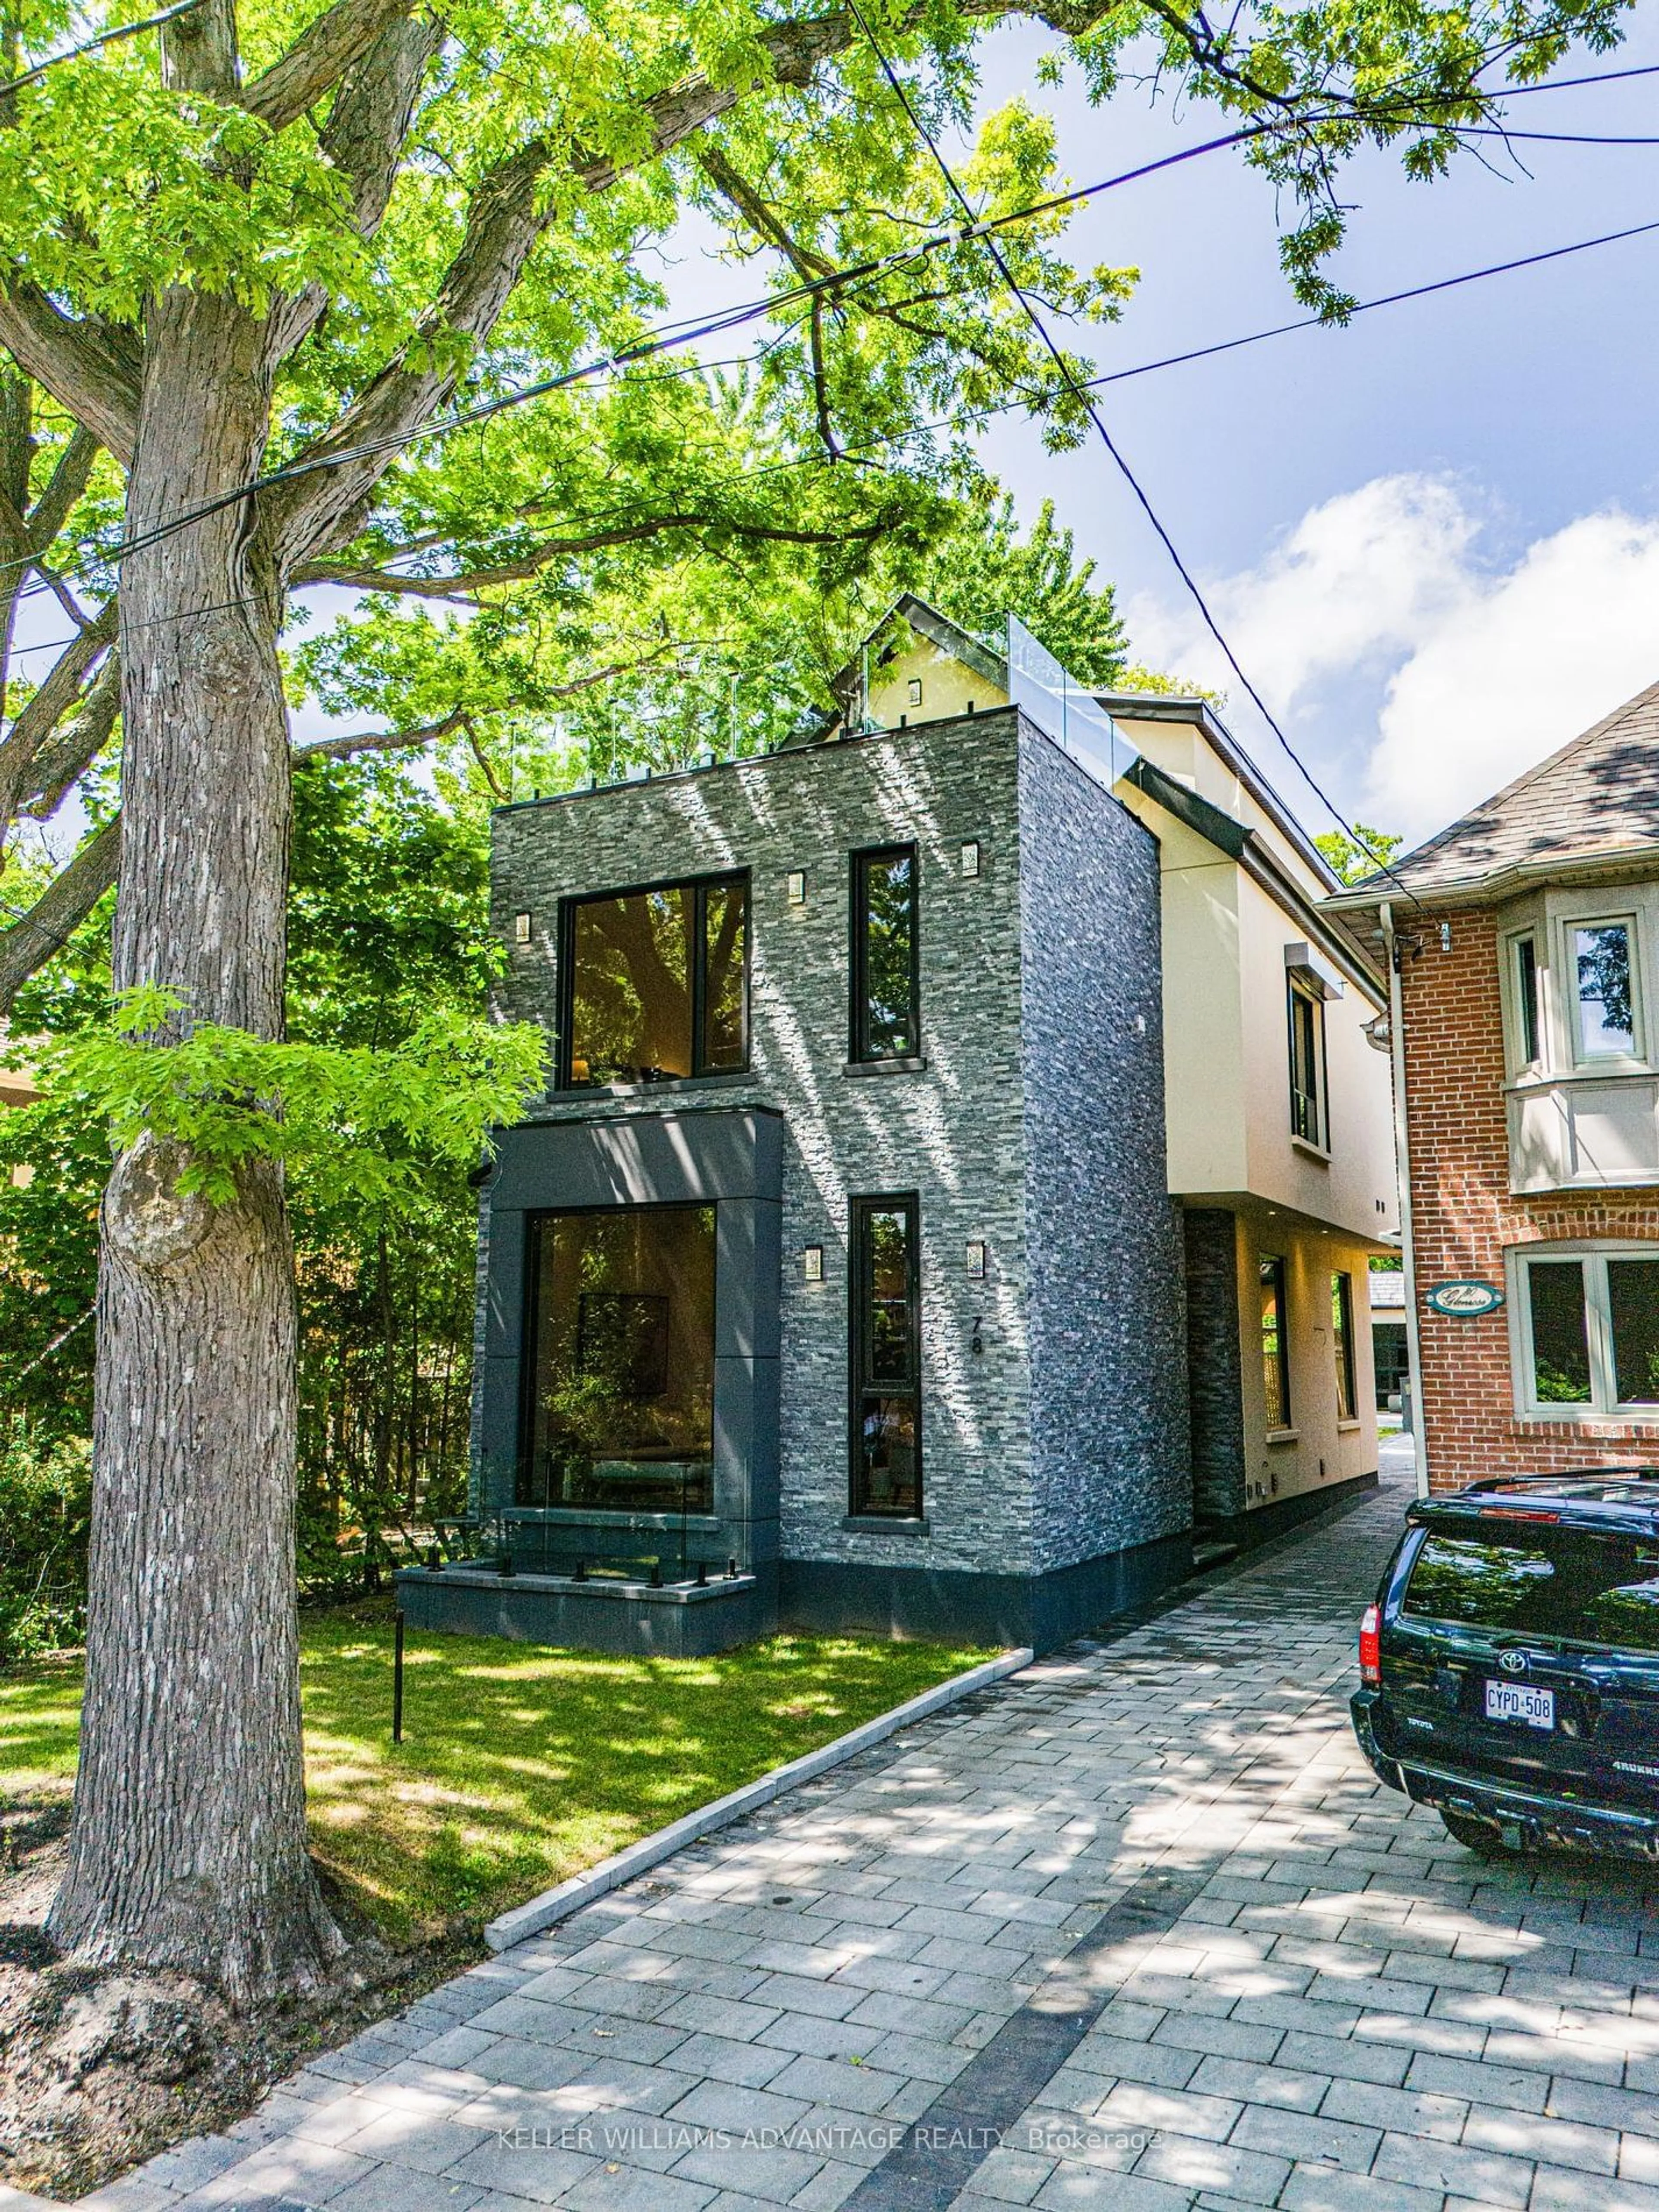 Home with brick exterior material for 78 Glenrose Ave, Toronto Ontario M4T 1K6